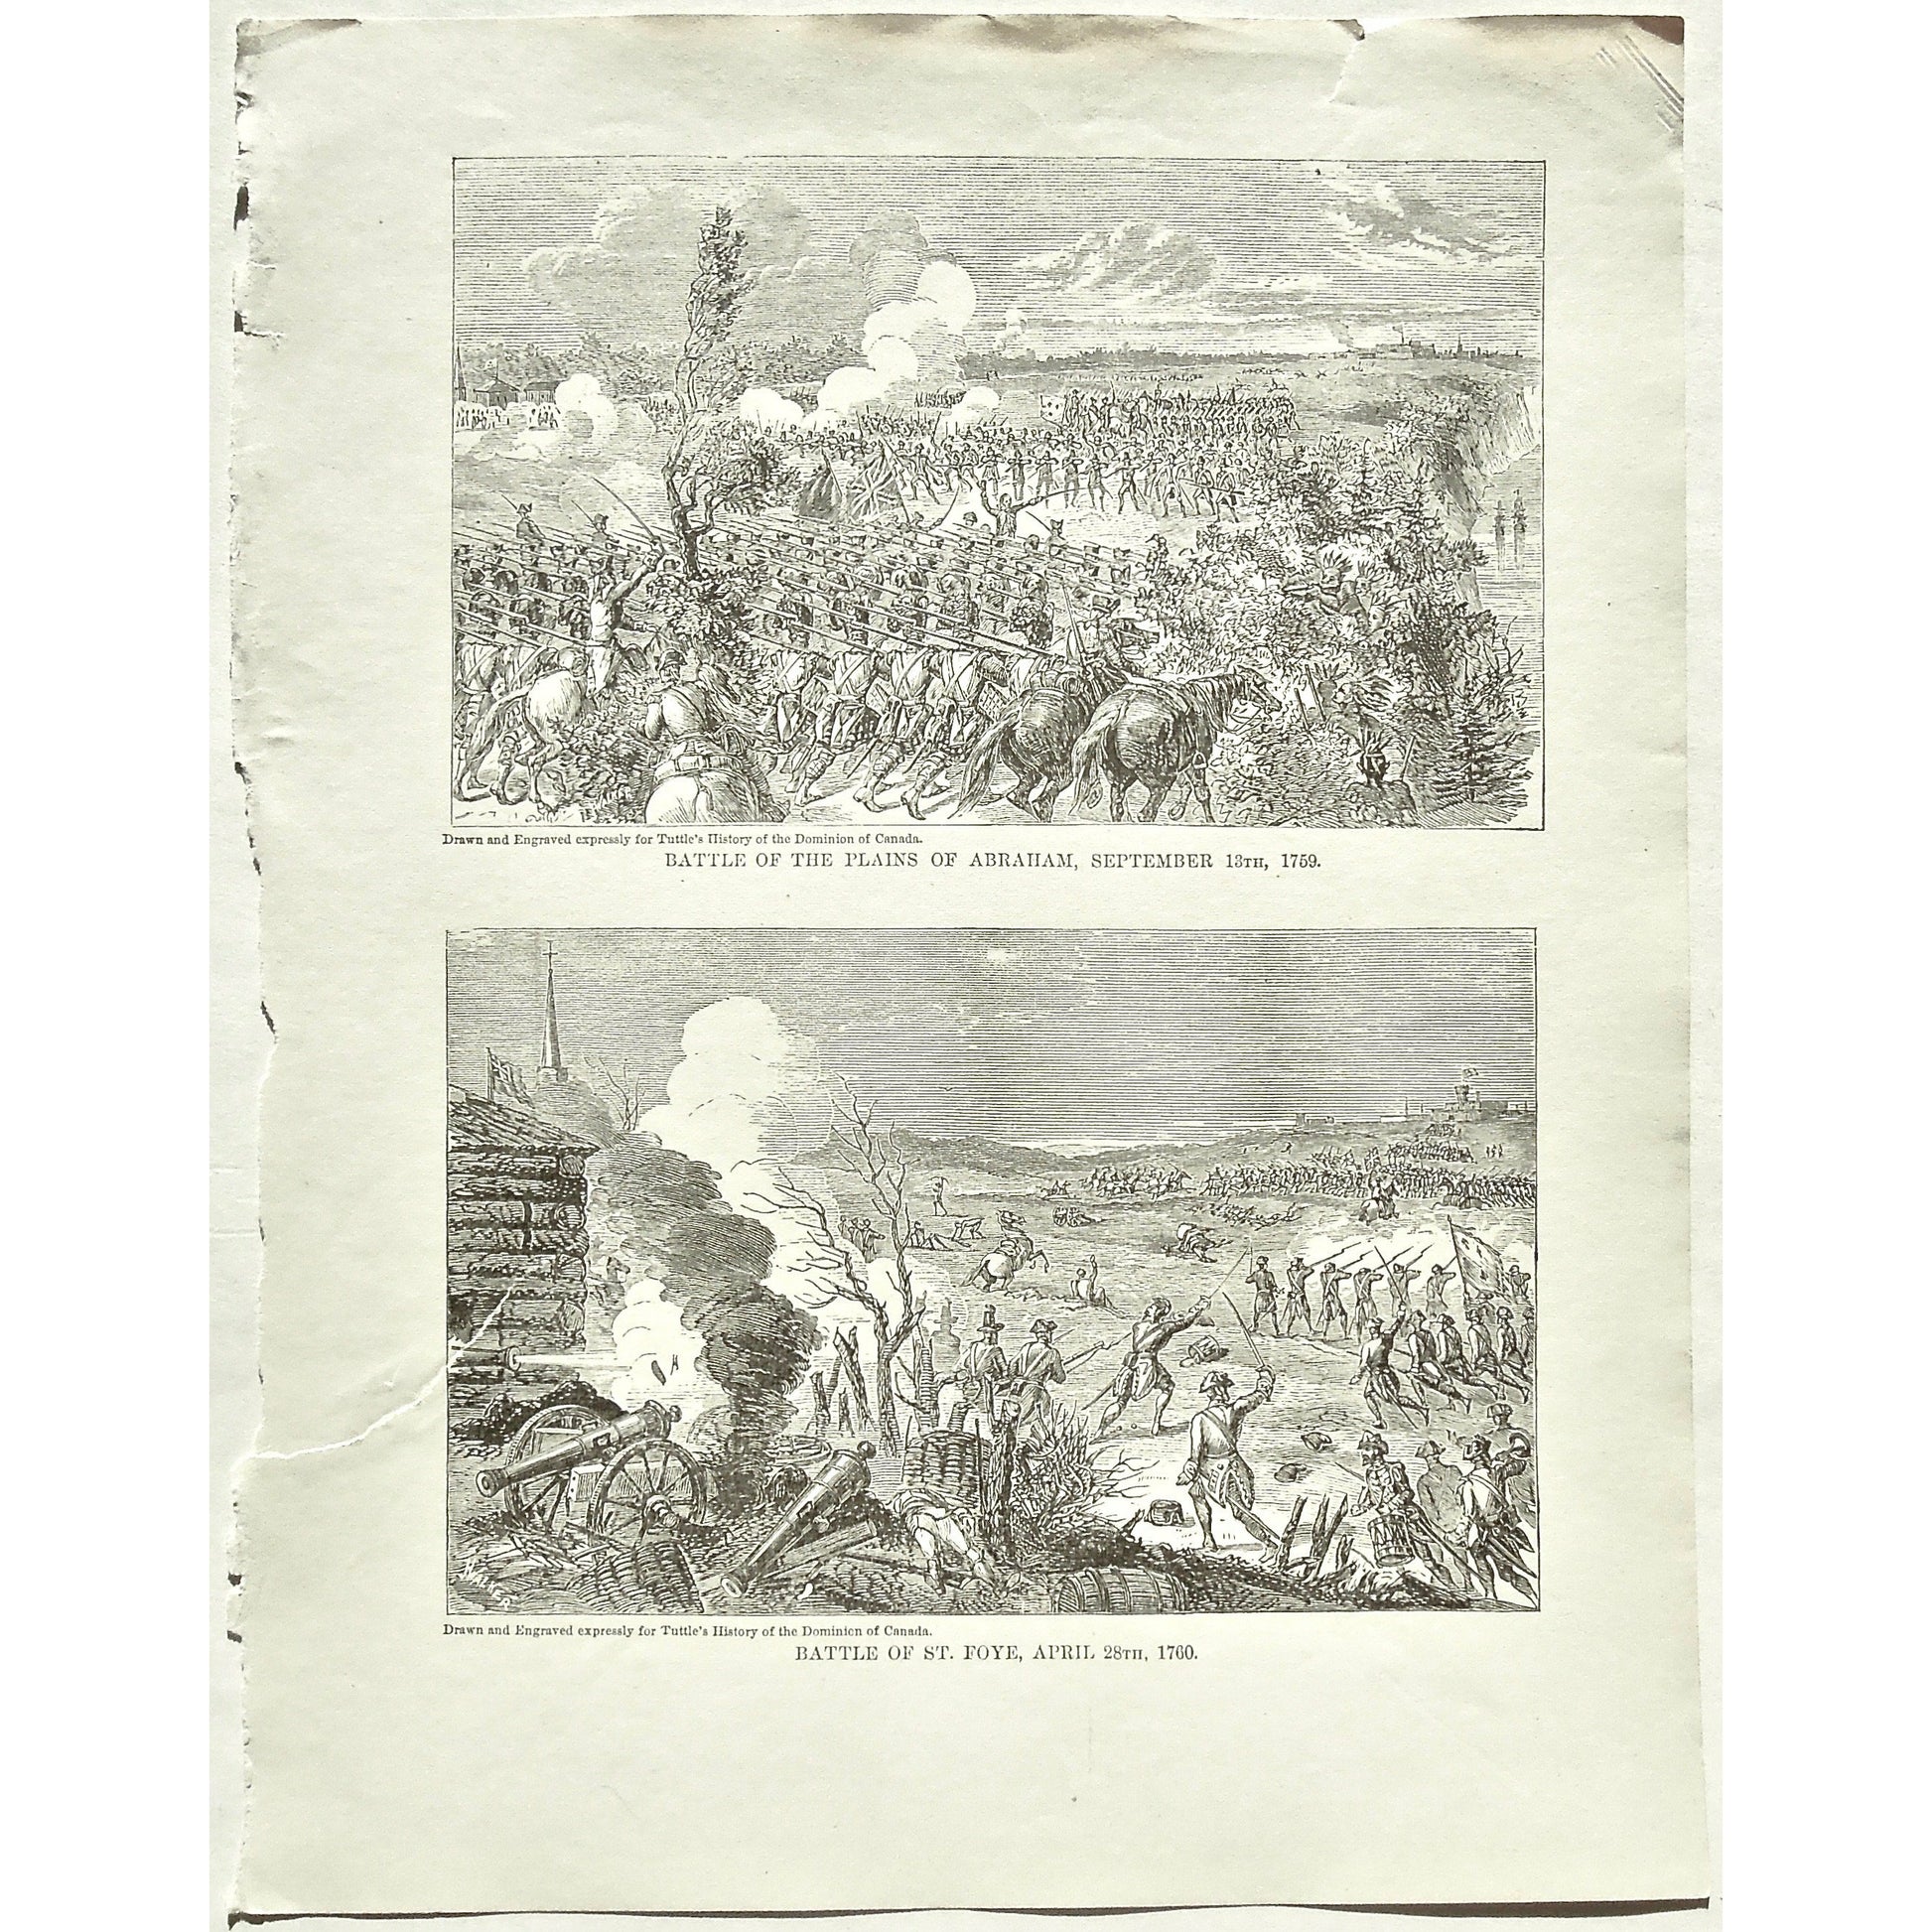 Battle of the Plains of Abraham, Battle, Plains of Abraham, Battles, September 13th, 1759, Battle of St. Foye, St. Foye, April 28th, 1760, Soldiers, Troops, Cavalry, Weapons, Guns, War, Army, Battle Formation, Canon, Drummer, Flag, Union Jack, British Flag, British Troops, English Flag, English Troops, Tuttle, Charles Tuttle, History of the Dominion, Popular History of the Dominion, Downie, Bigney, History, Dominion, Canada, Canadian History, Antique, Antique Print, Steel Engraving, Engraving, Prints, 1877,